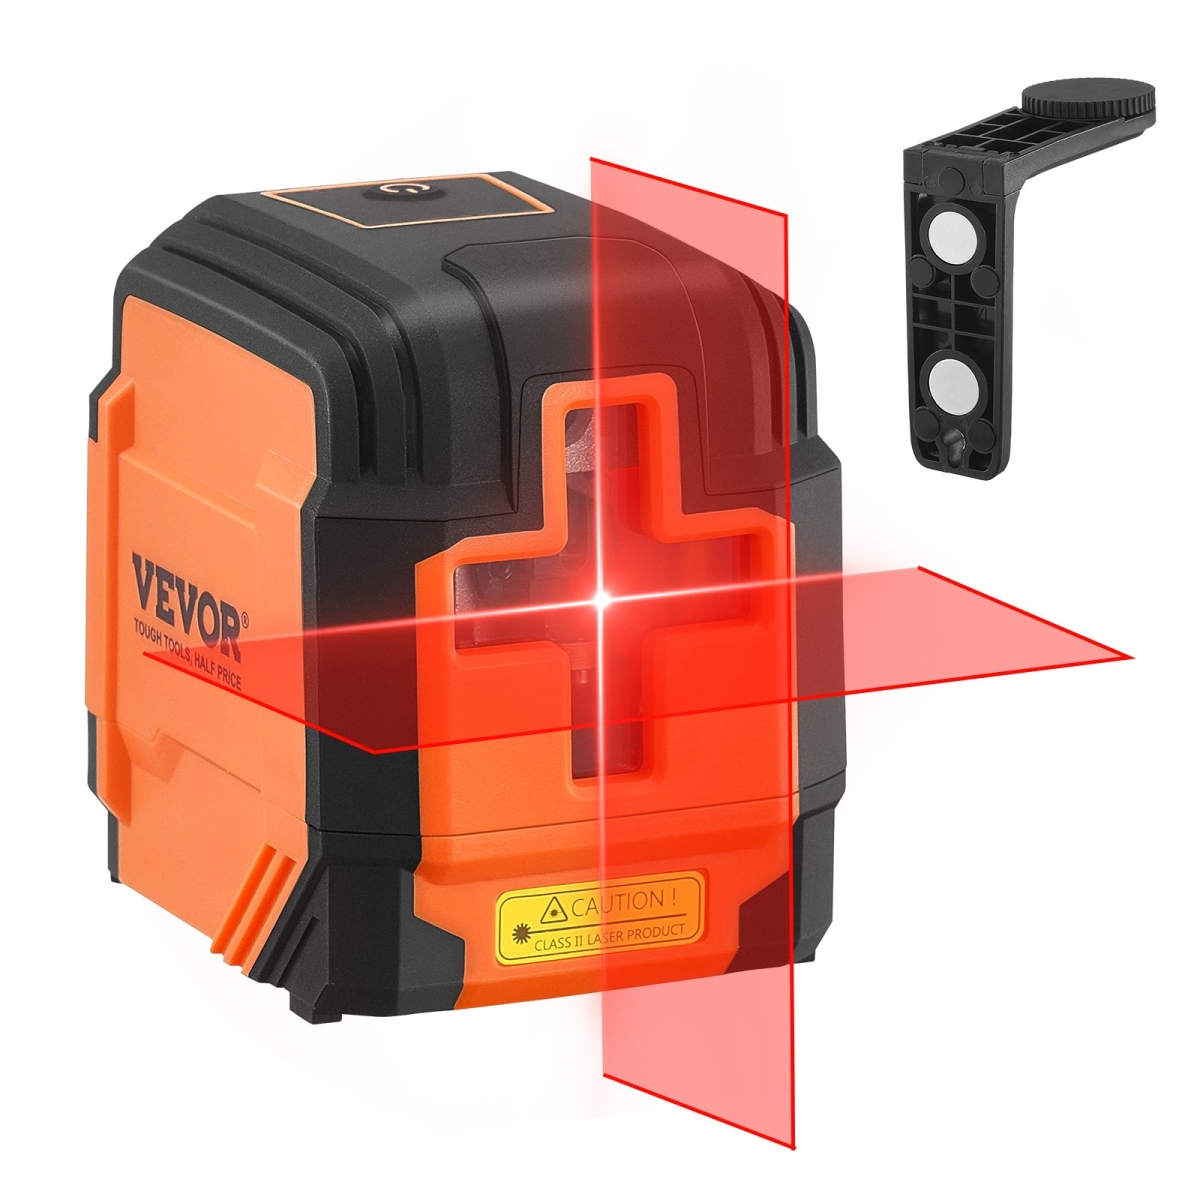 Picture of Vevor XJGSPYHH50FT210JIV9 50 ft. Cross Line Laser Level Self Leveling Manual Setting Red Beam